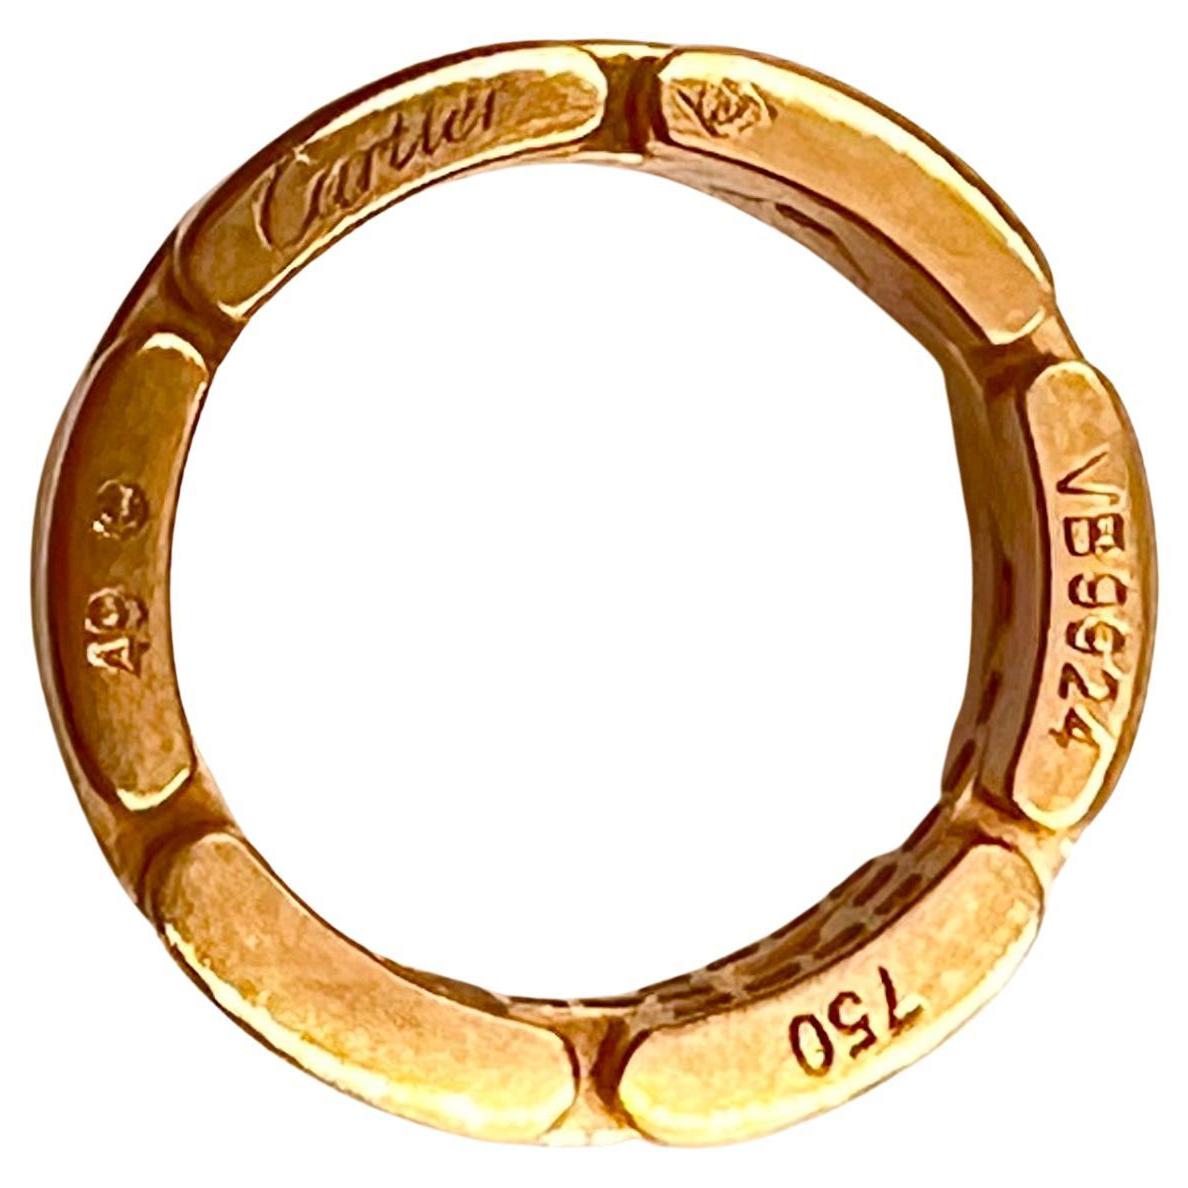 Cartier Maillon Panthere ring with round brilliant-cut diamonds set halfway around in polished 18k rose gold. 28 round brilliant-cut diamonds weighing approximately 0.41 total carats. Signed 'Cartier' '750' '49' with serial number.  Includes